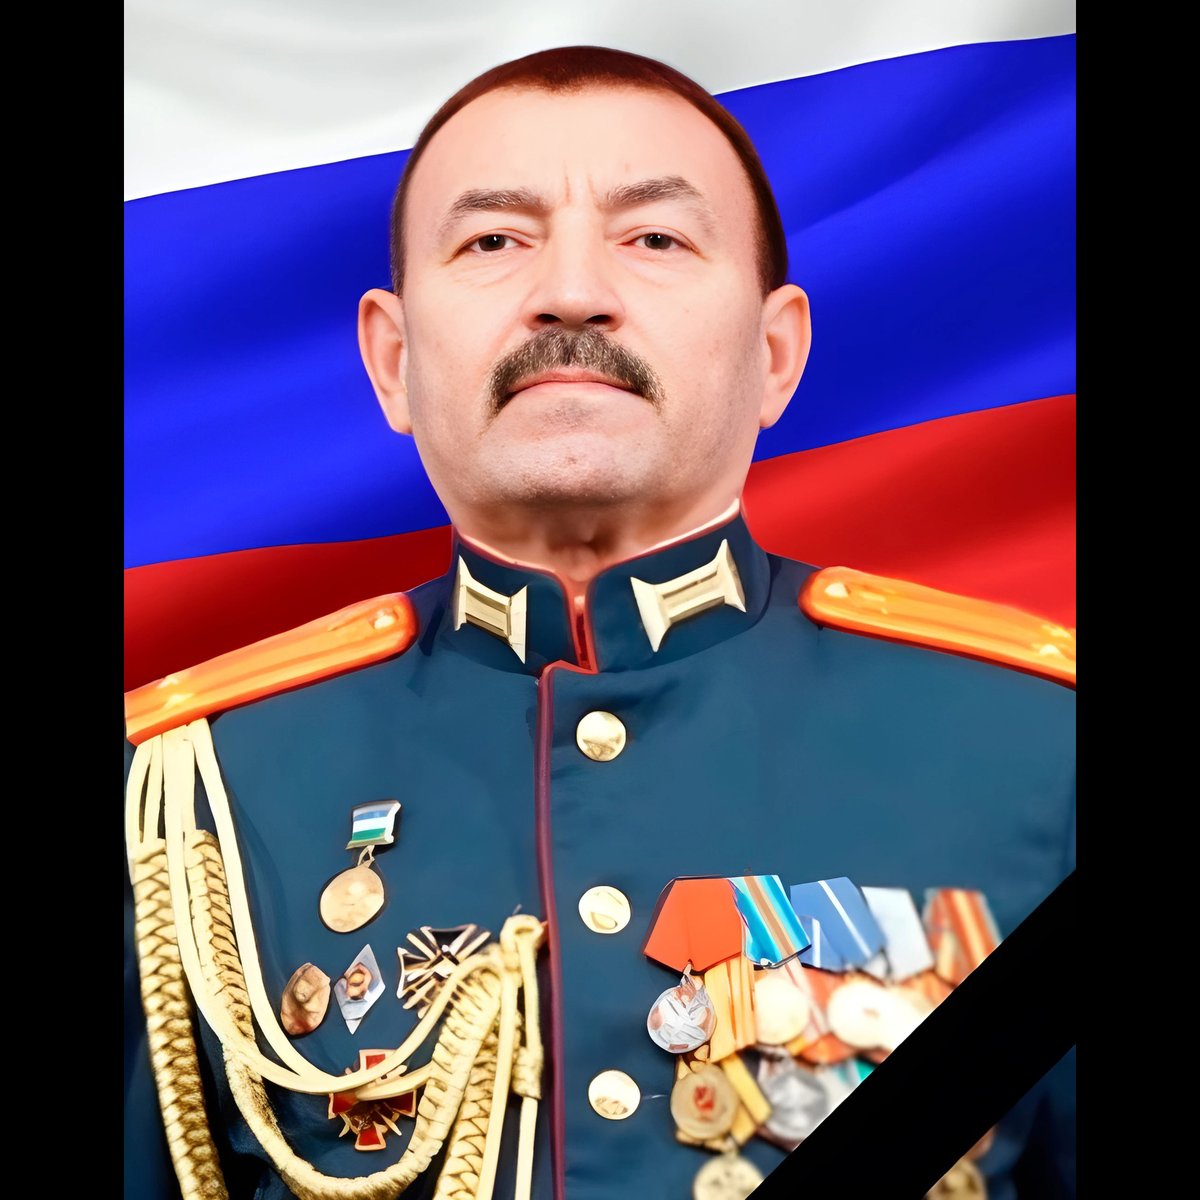 Military commissar Lieutenant Colonel Rinat Nurtdinovich Gimalov from Bashkortostan died in a car accident near Ufa.
He was active “in the tasks of partial mobilisation and achievement of high performance in conscription of citizens for military service”.
karmaskaly-nov.ru/news/obshchest…